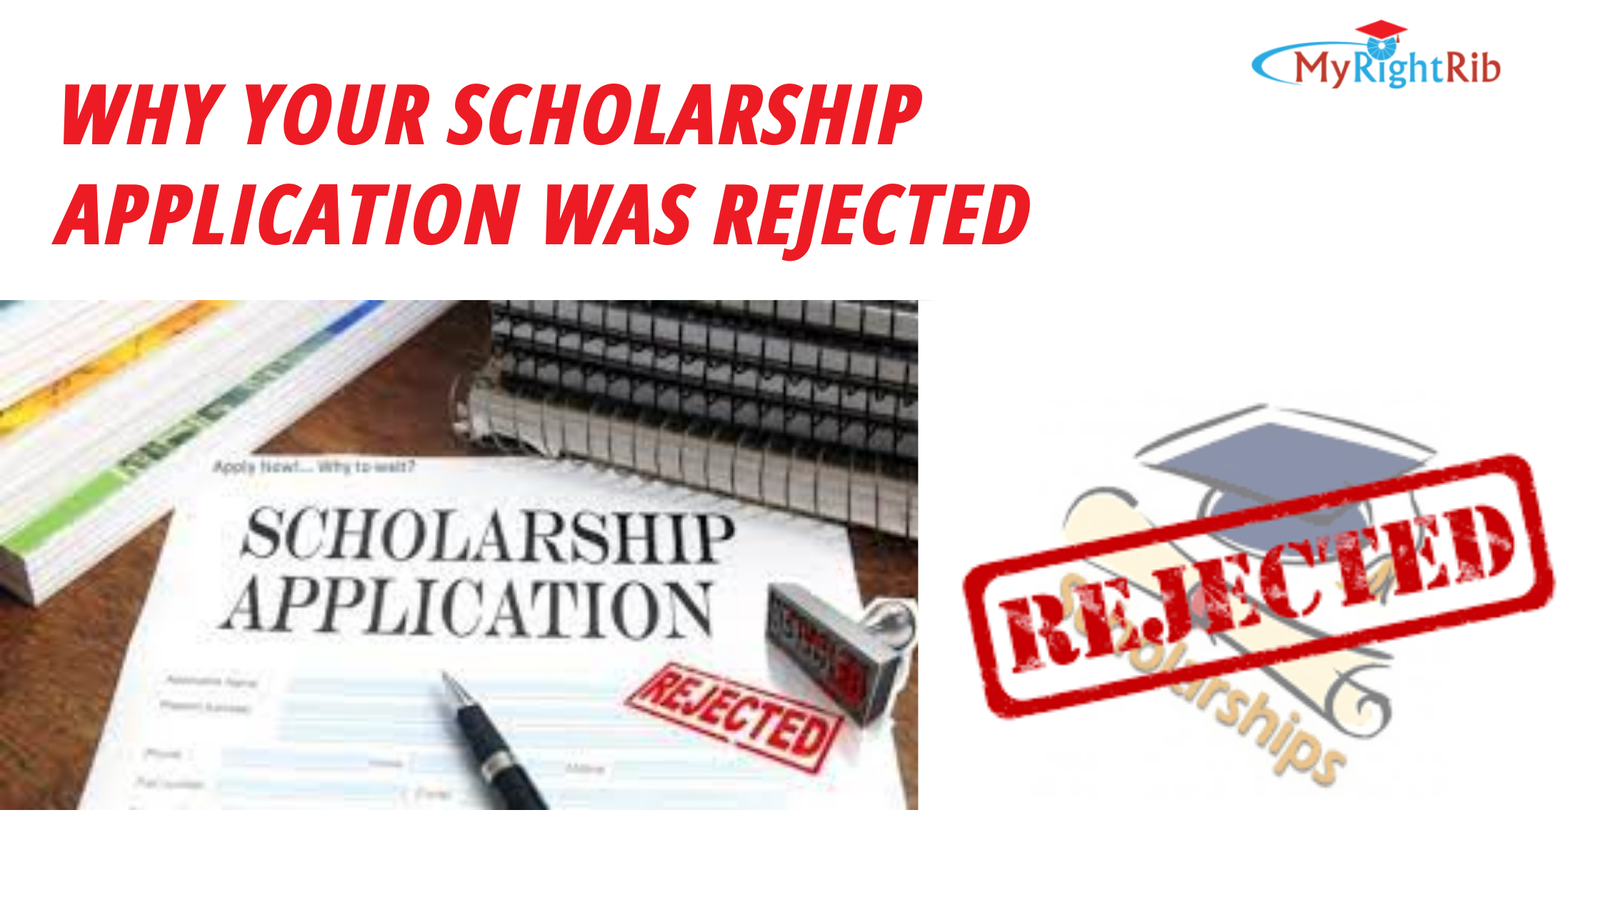 WHY YOUR SCHOLARSHIP APPLICATION WAS REJECTED